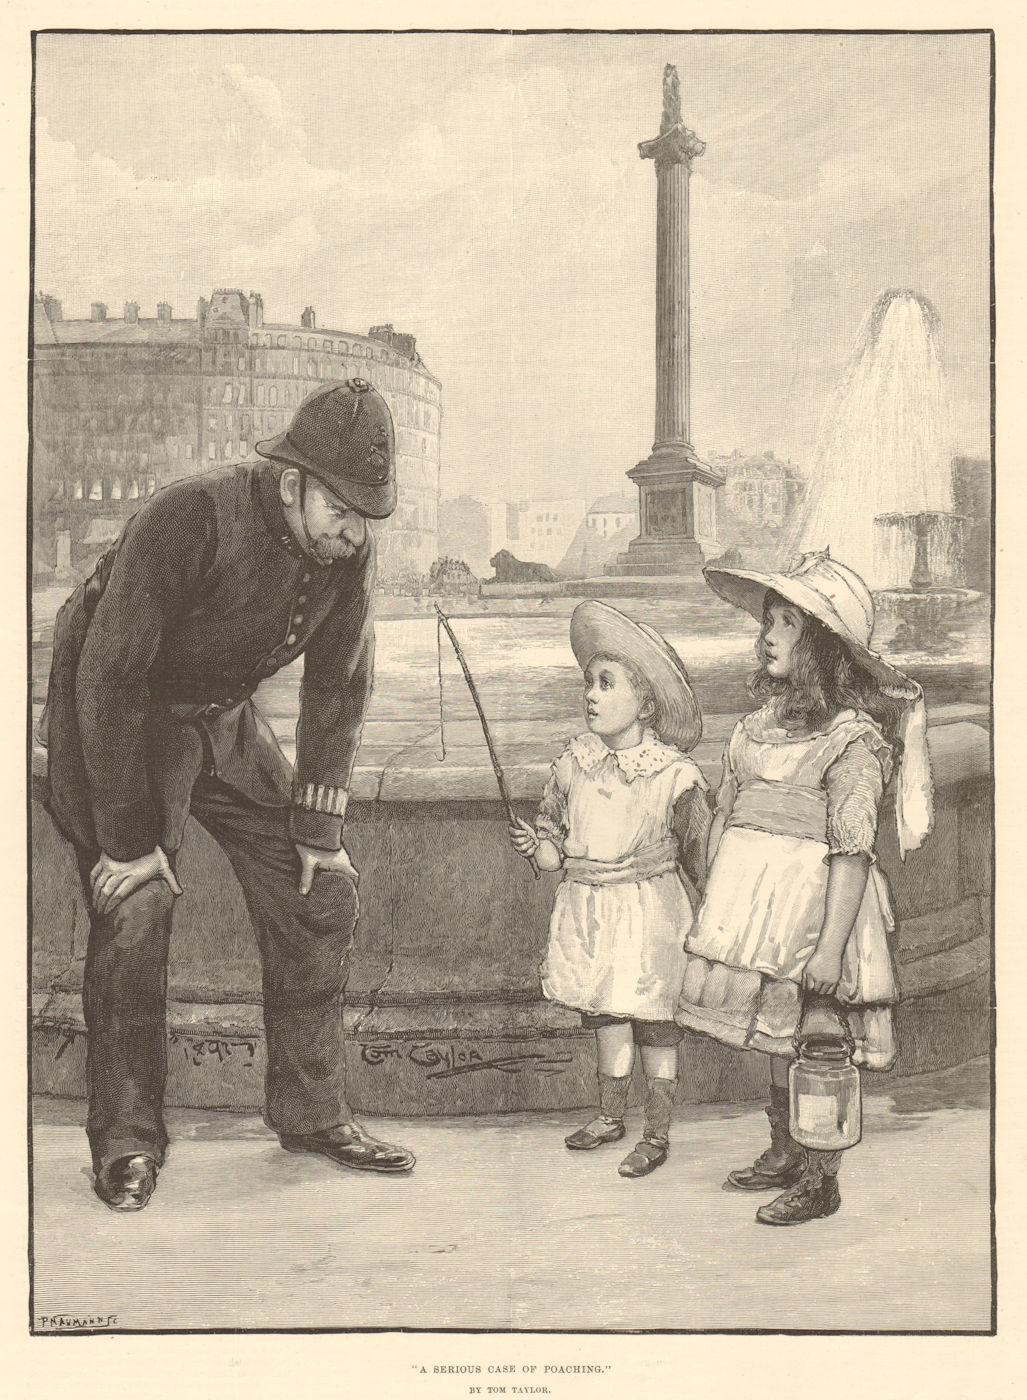 A serious case of poaching, by Tom Taylor. Trafalgar Square Children Police 1891